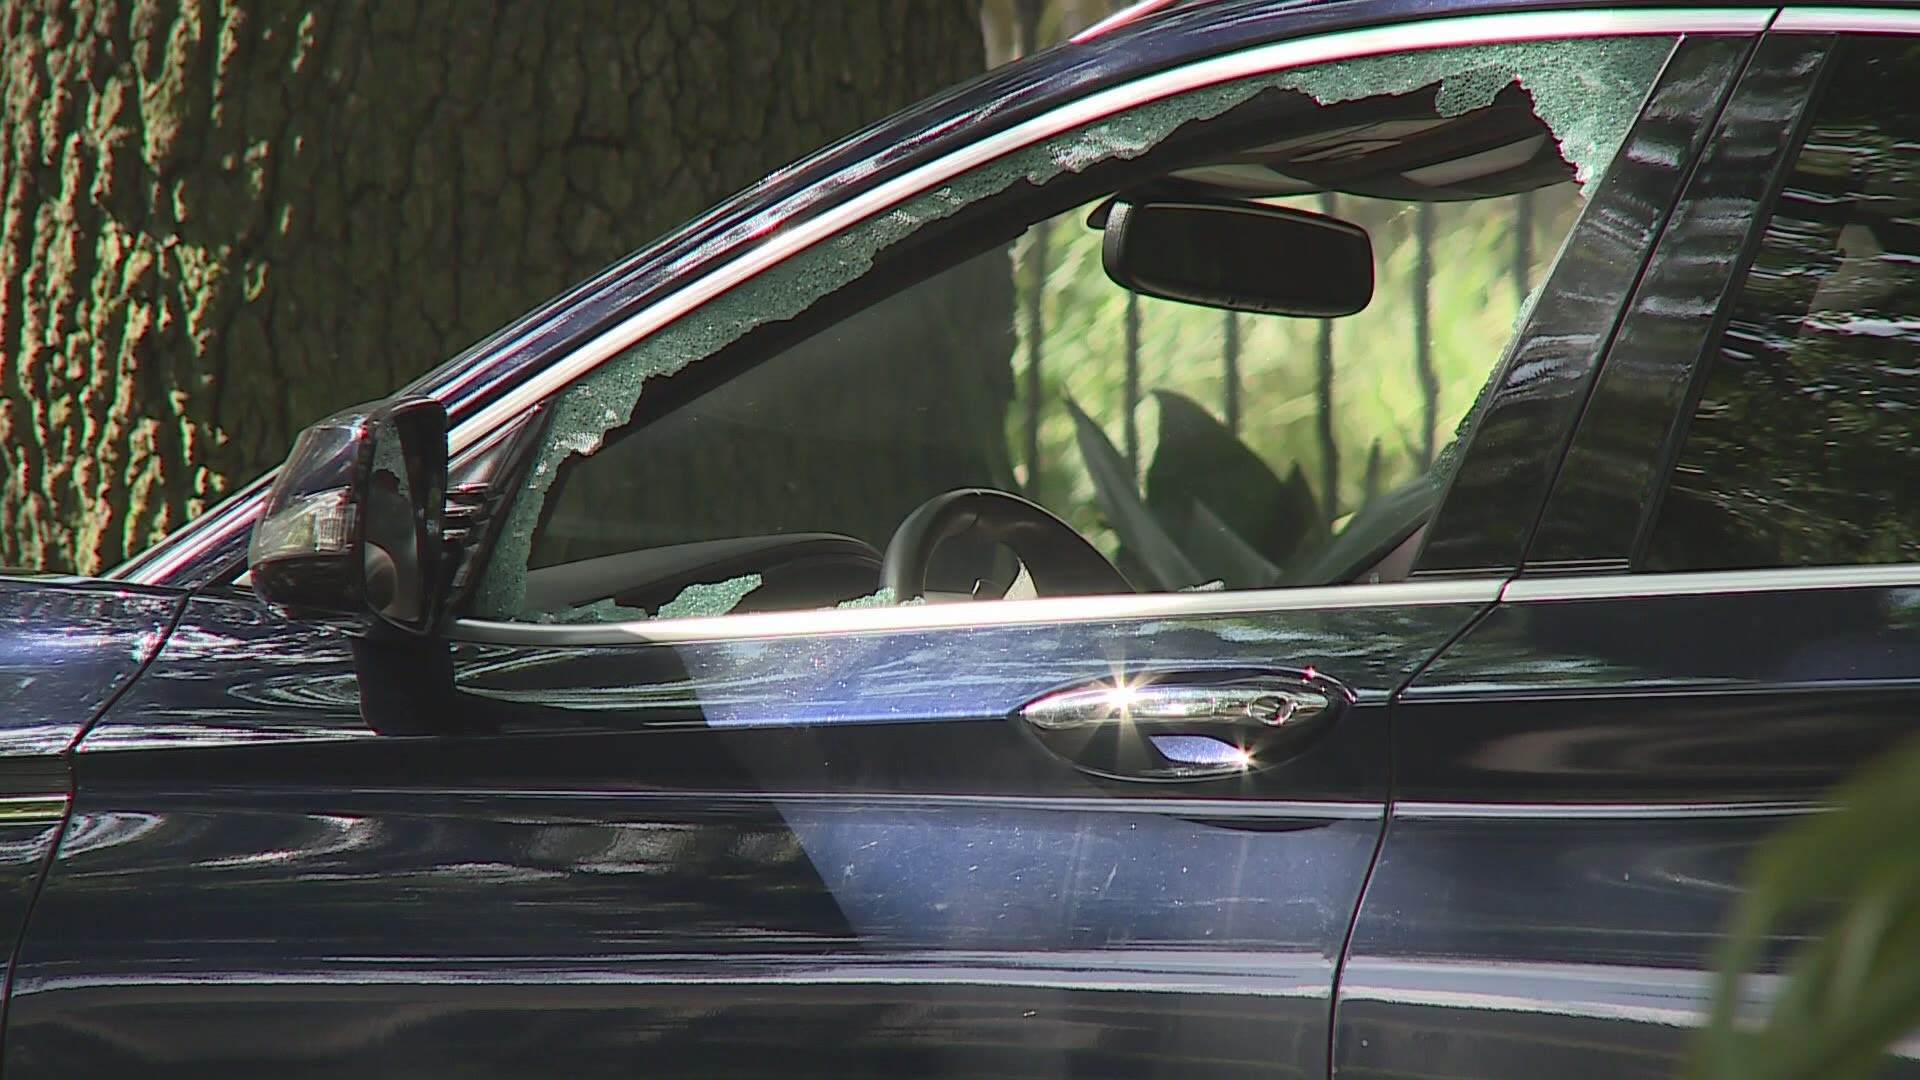 City, community leaders will plan how to end car break-ins in New Orleans